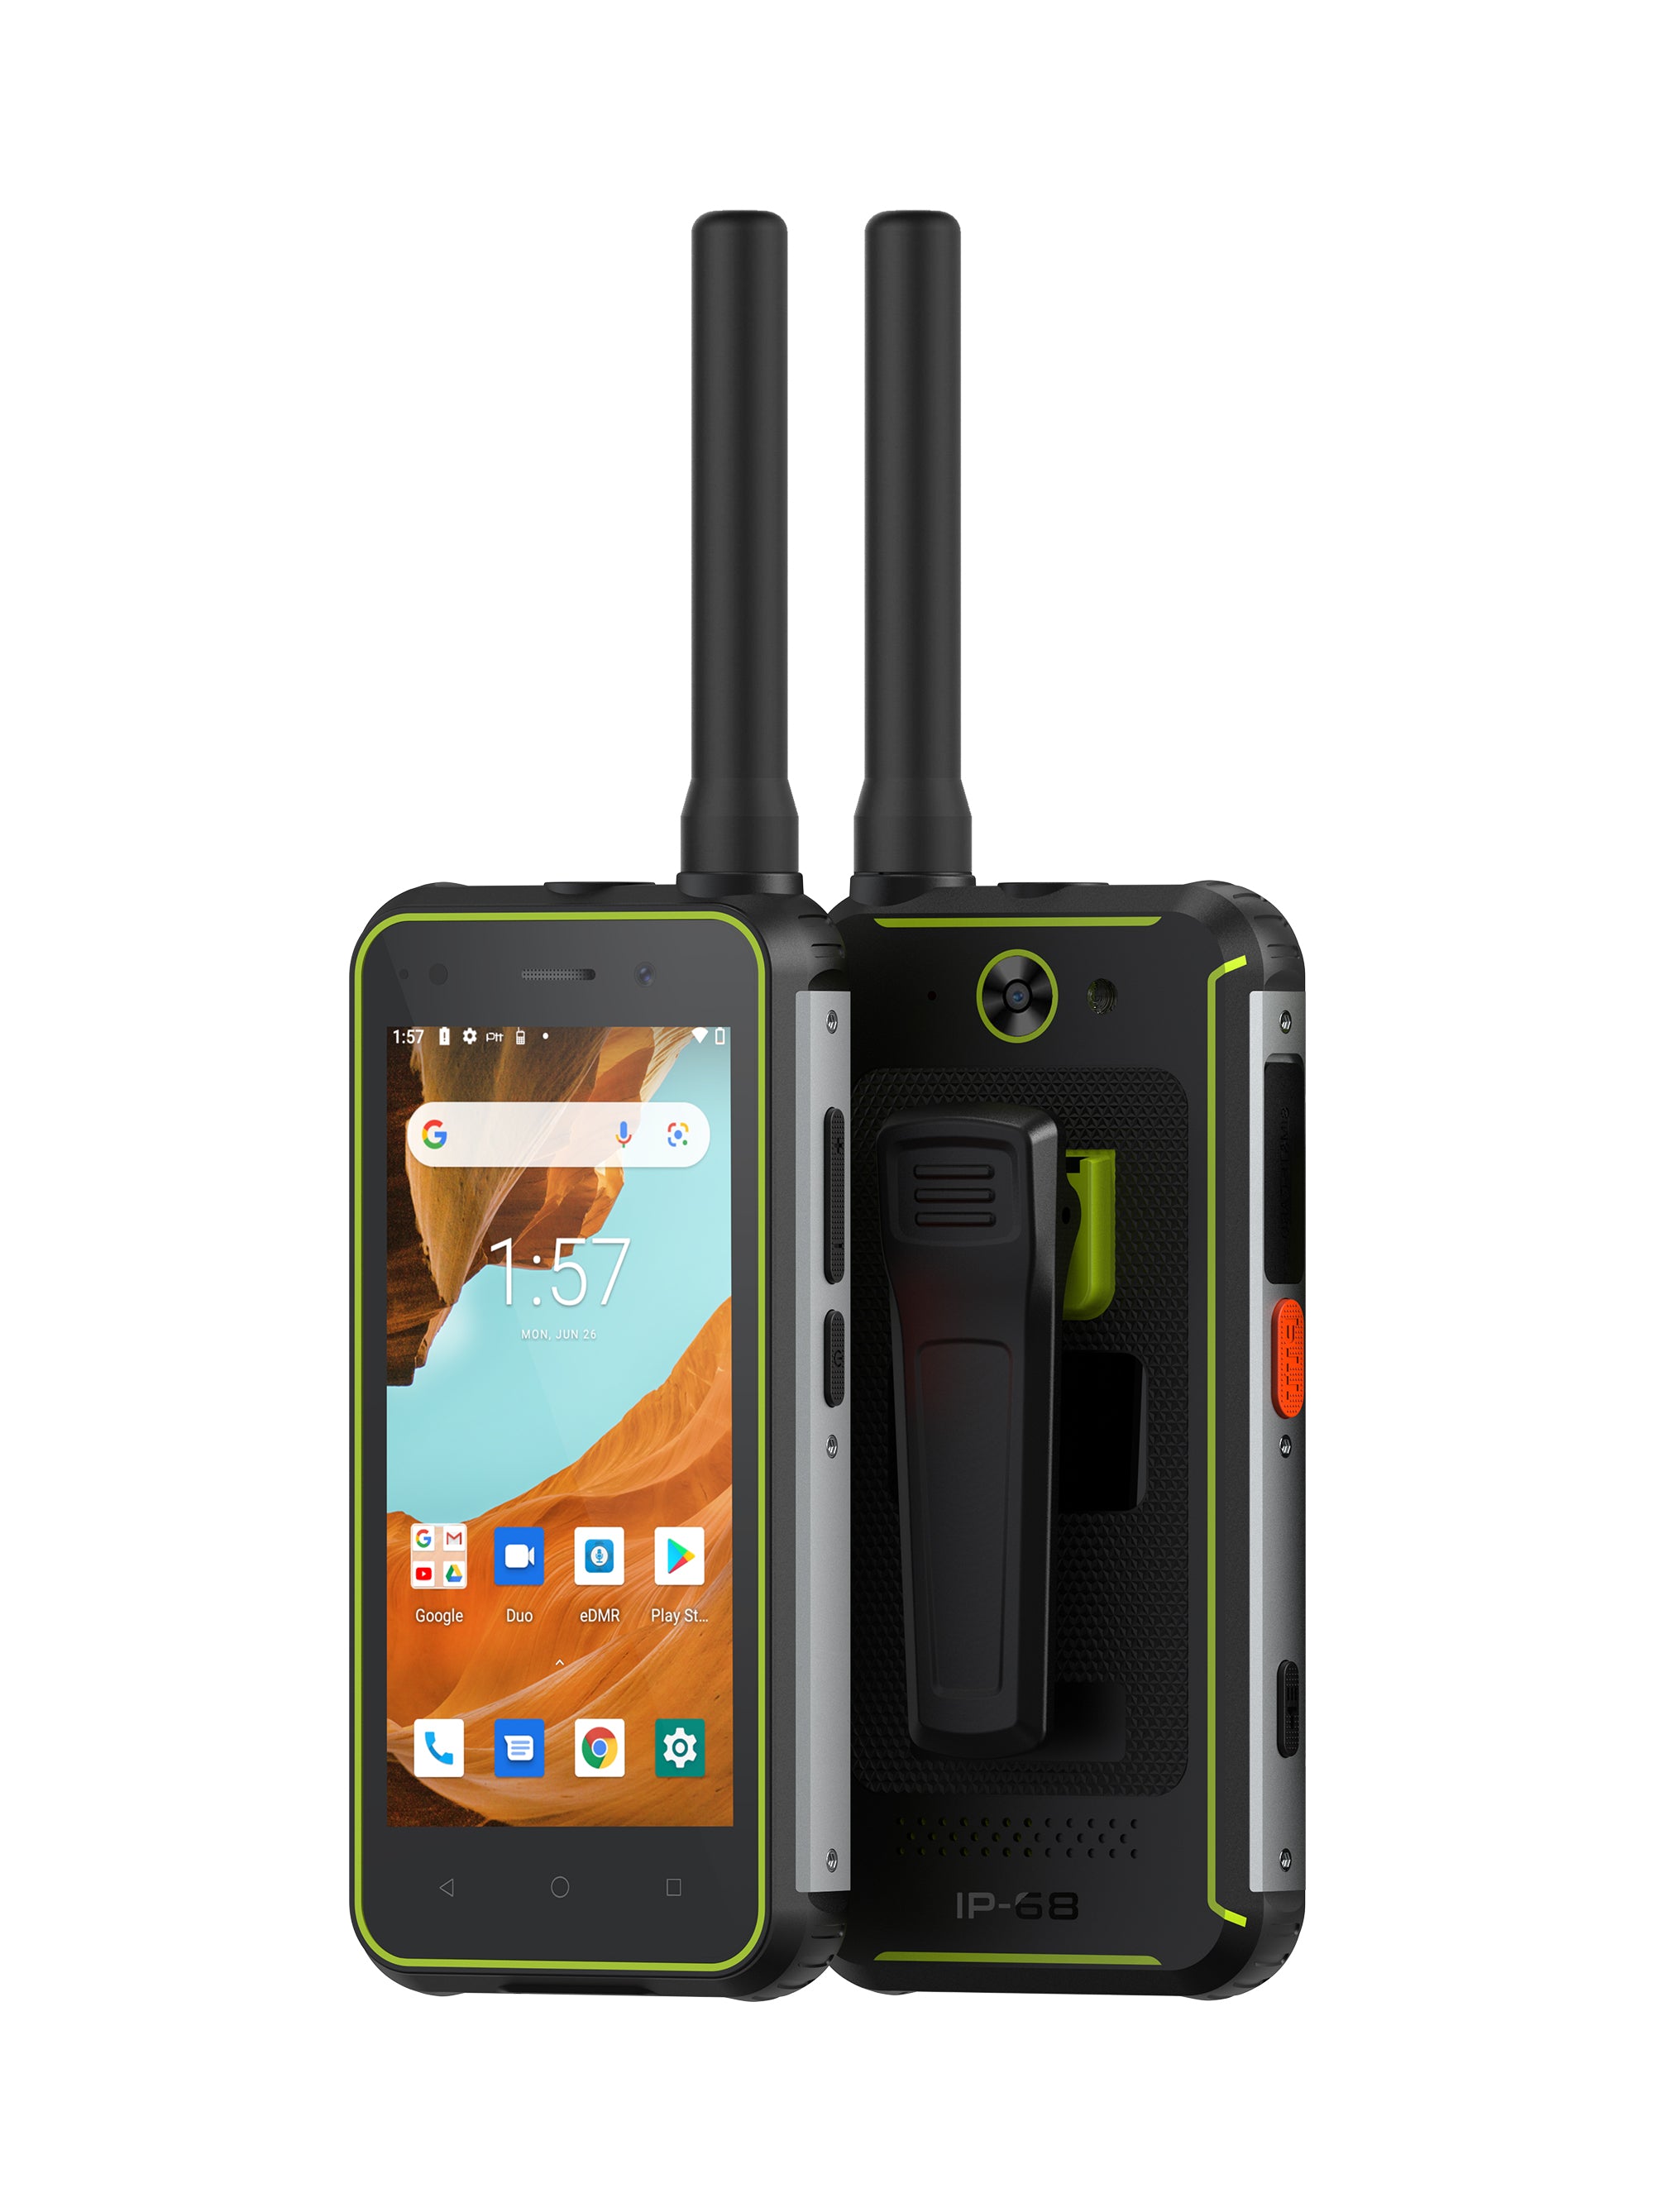 Phonemax R4 Pro Rugged Phone Built-in DMR and AMR, Walkie-talkie 4000mAh Battery